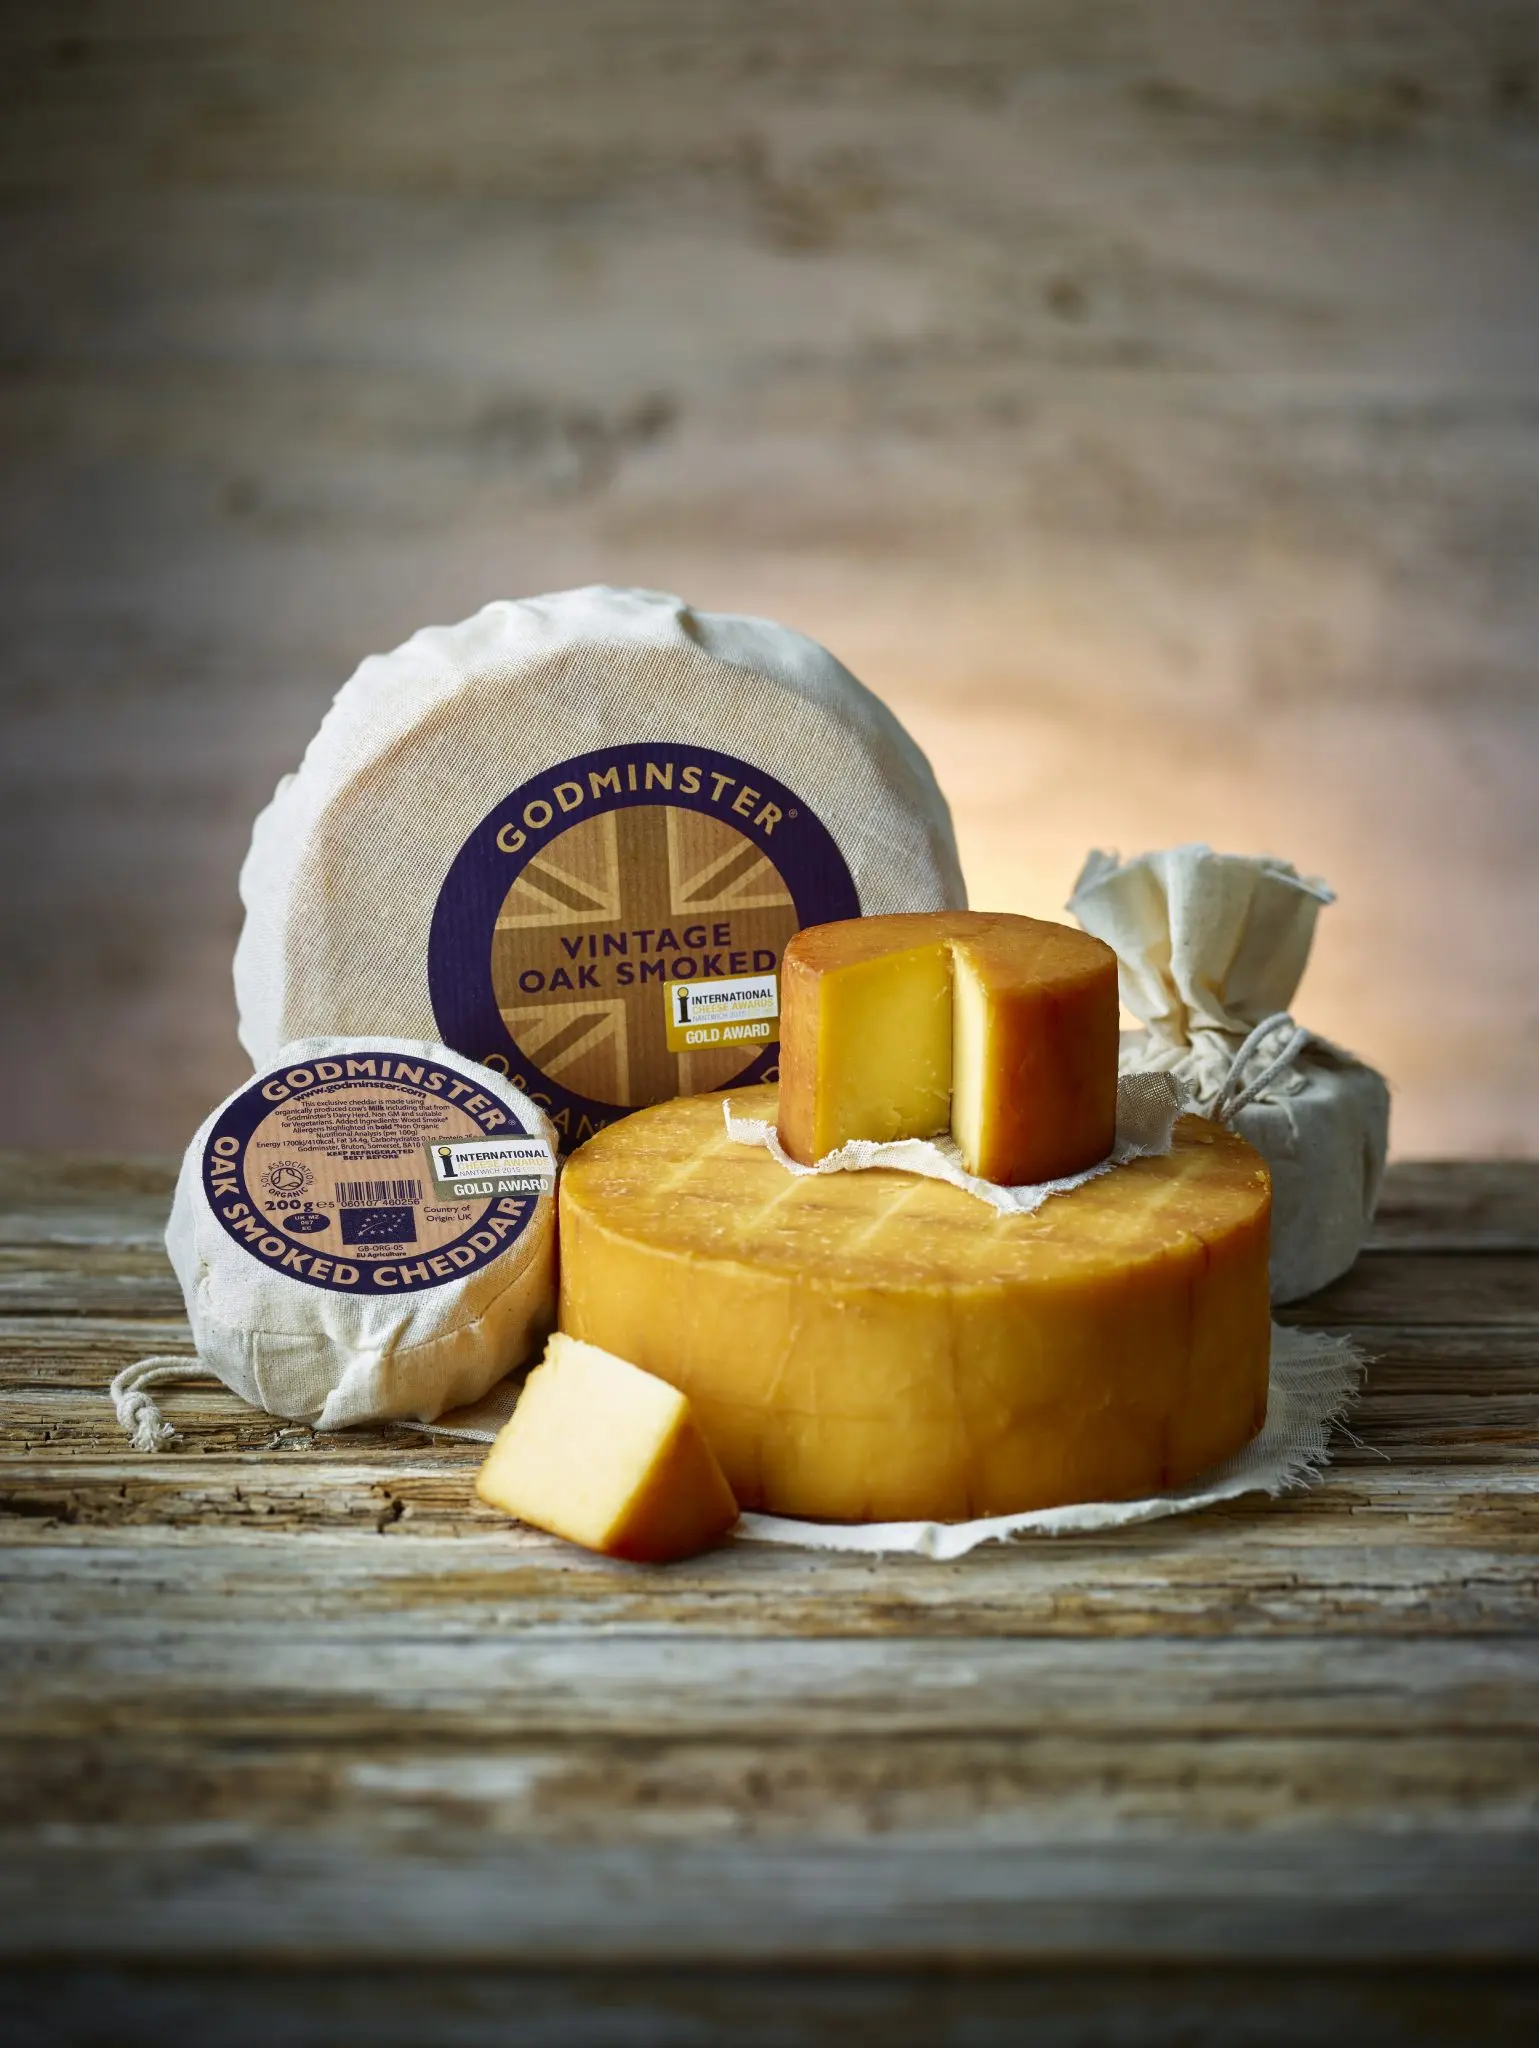 best smoked cheese uk - What are the 3 most popular cheeses in the UK